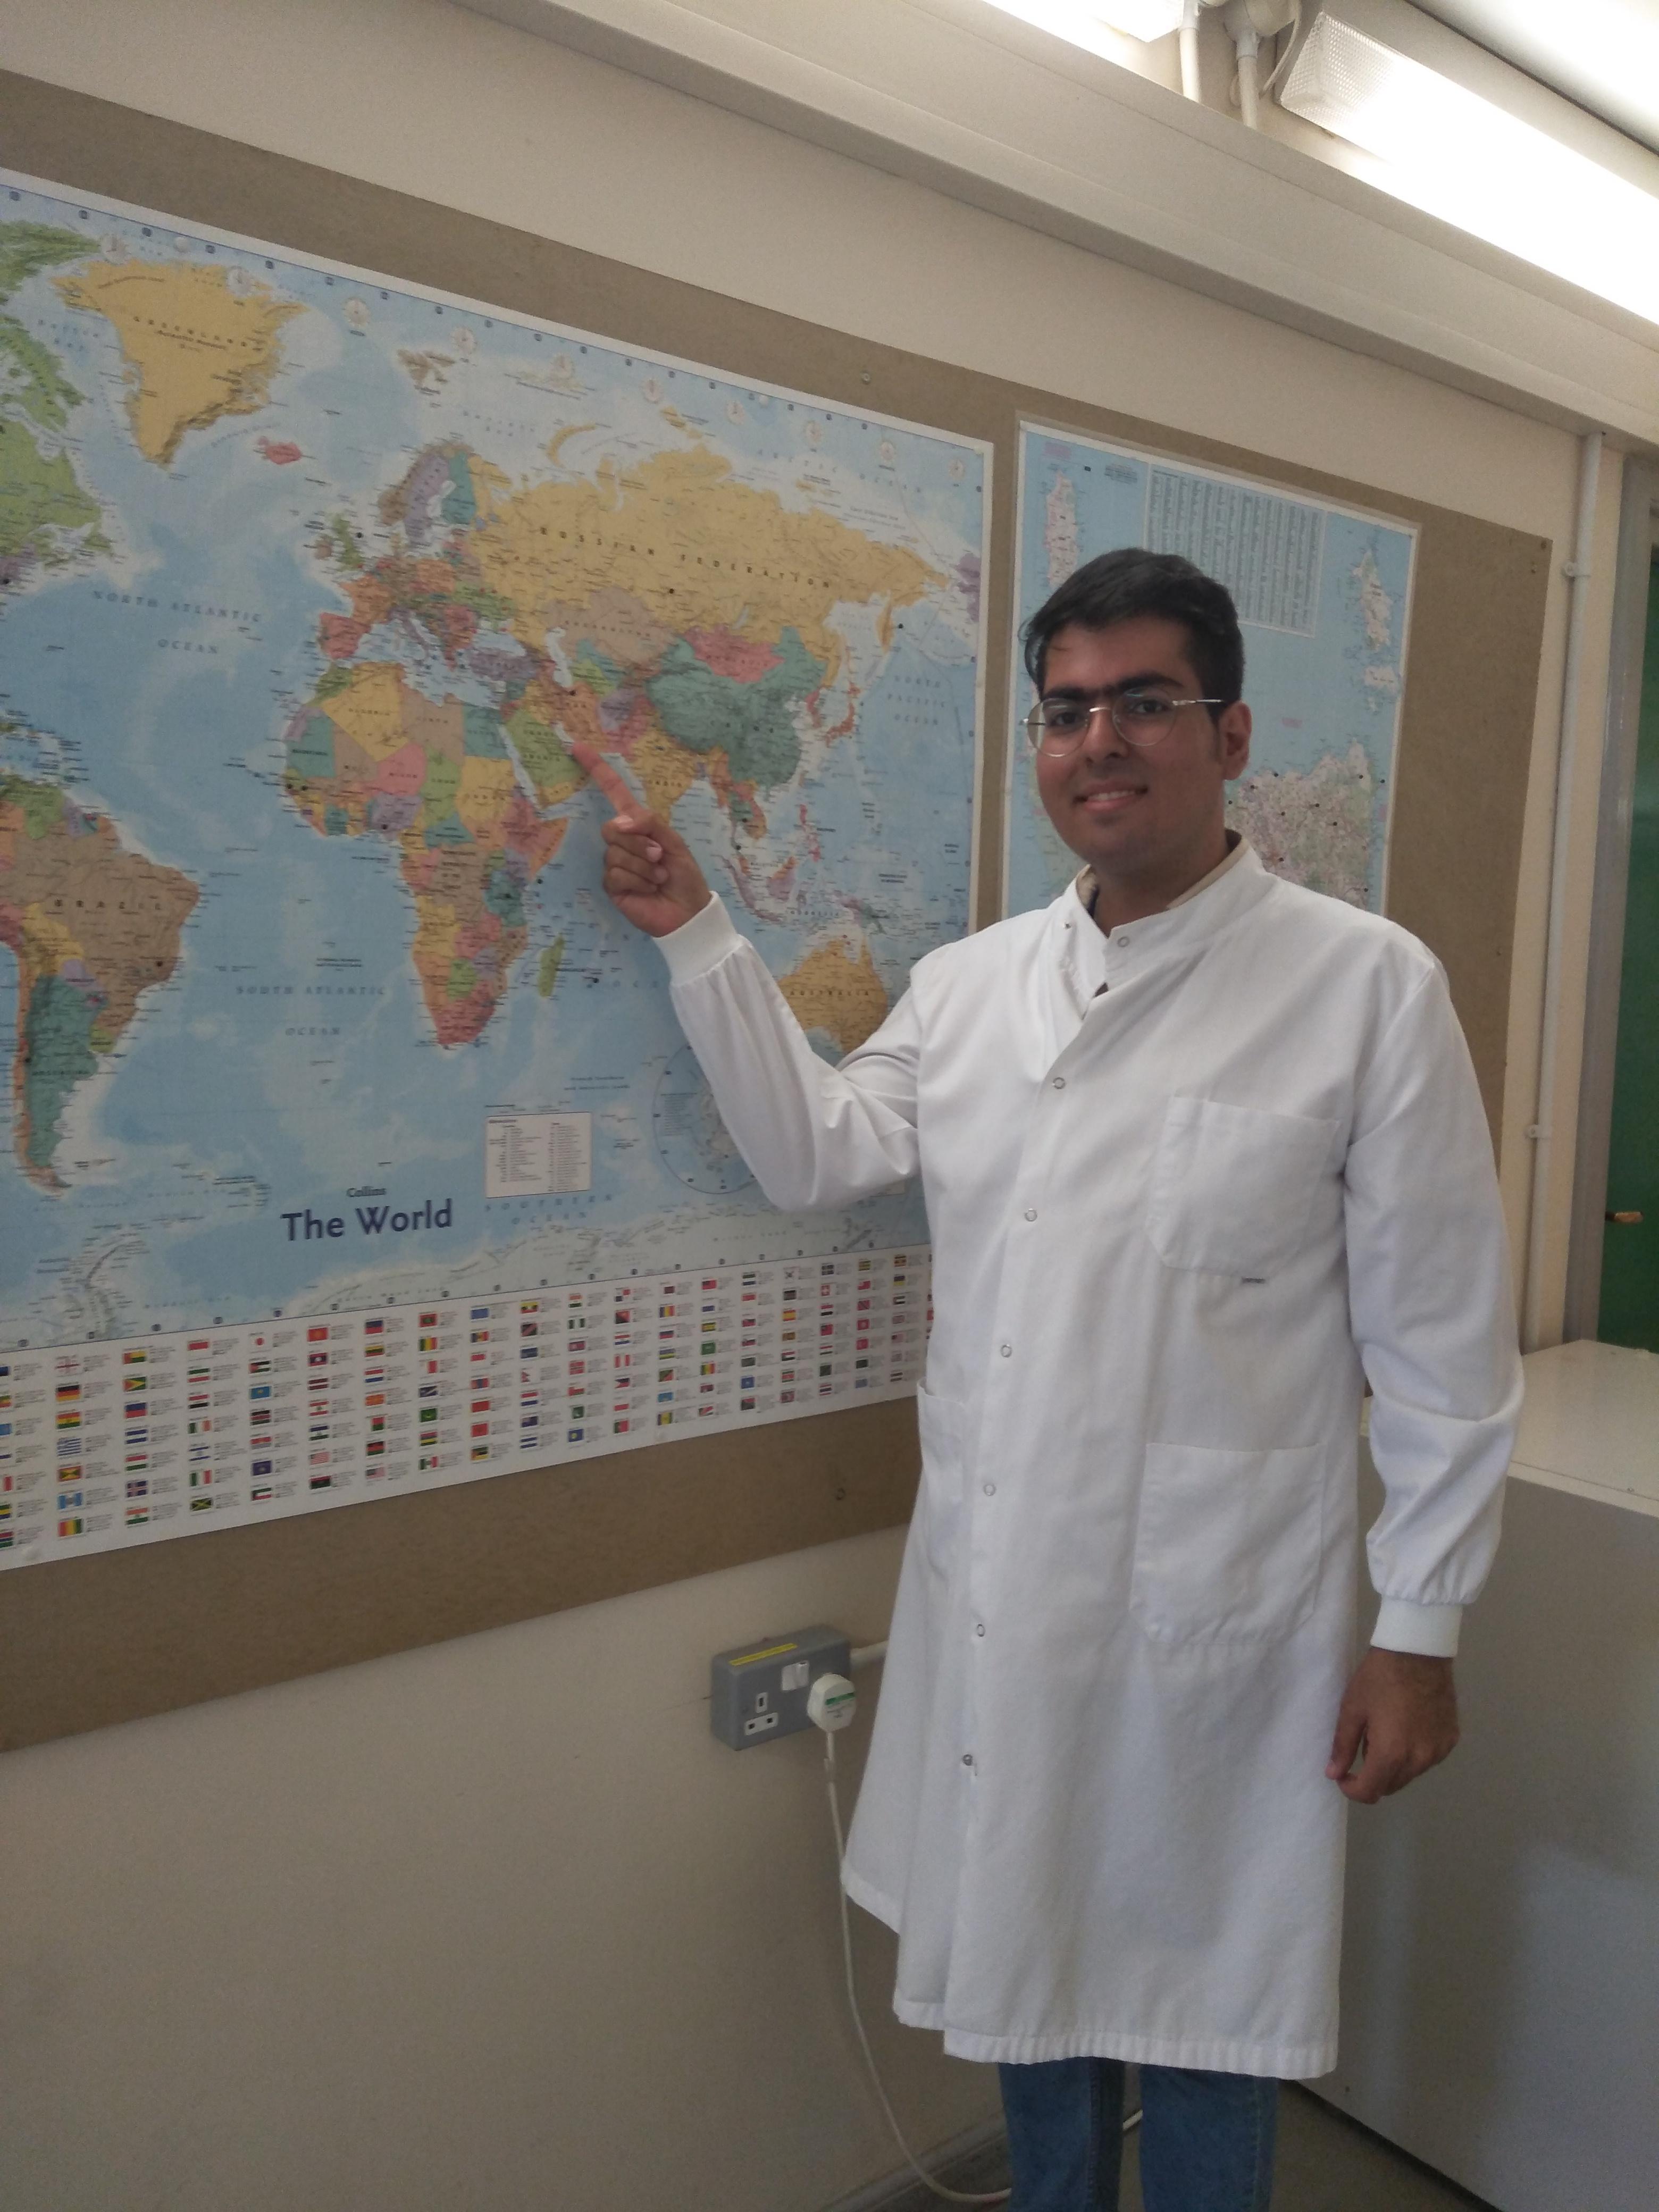 Soheil Afshari, a vet student from Iran, visited TCG and carried out research on CTVT